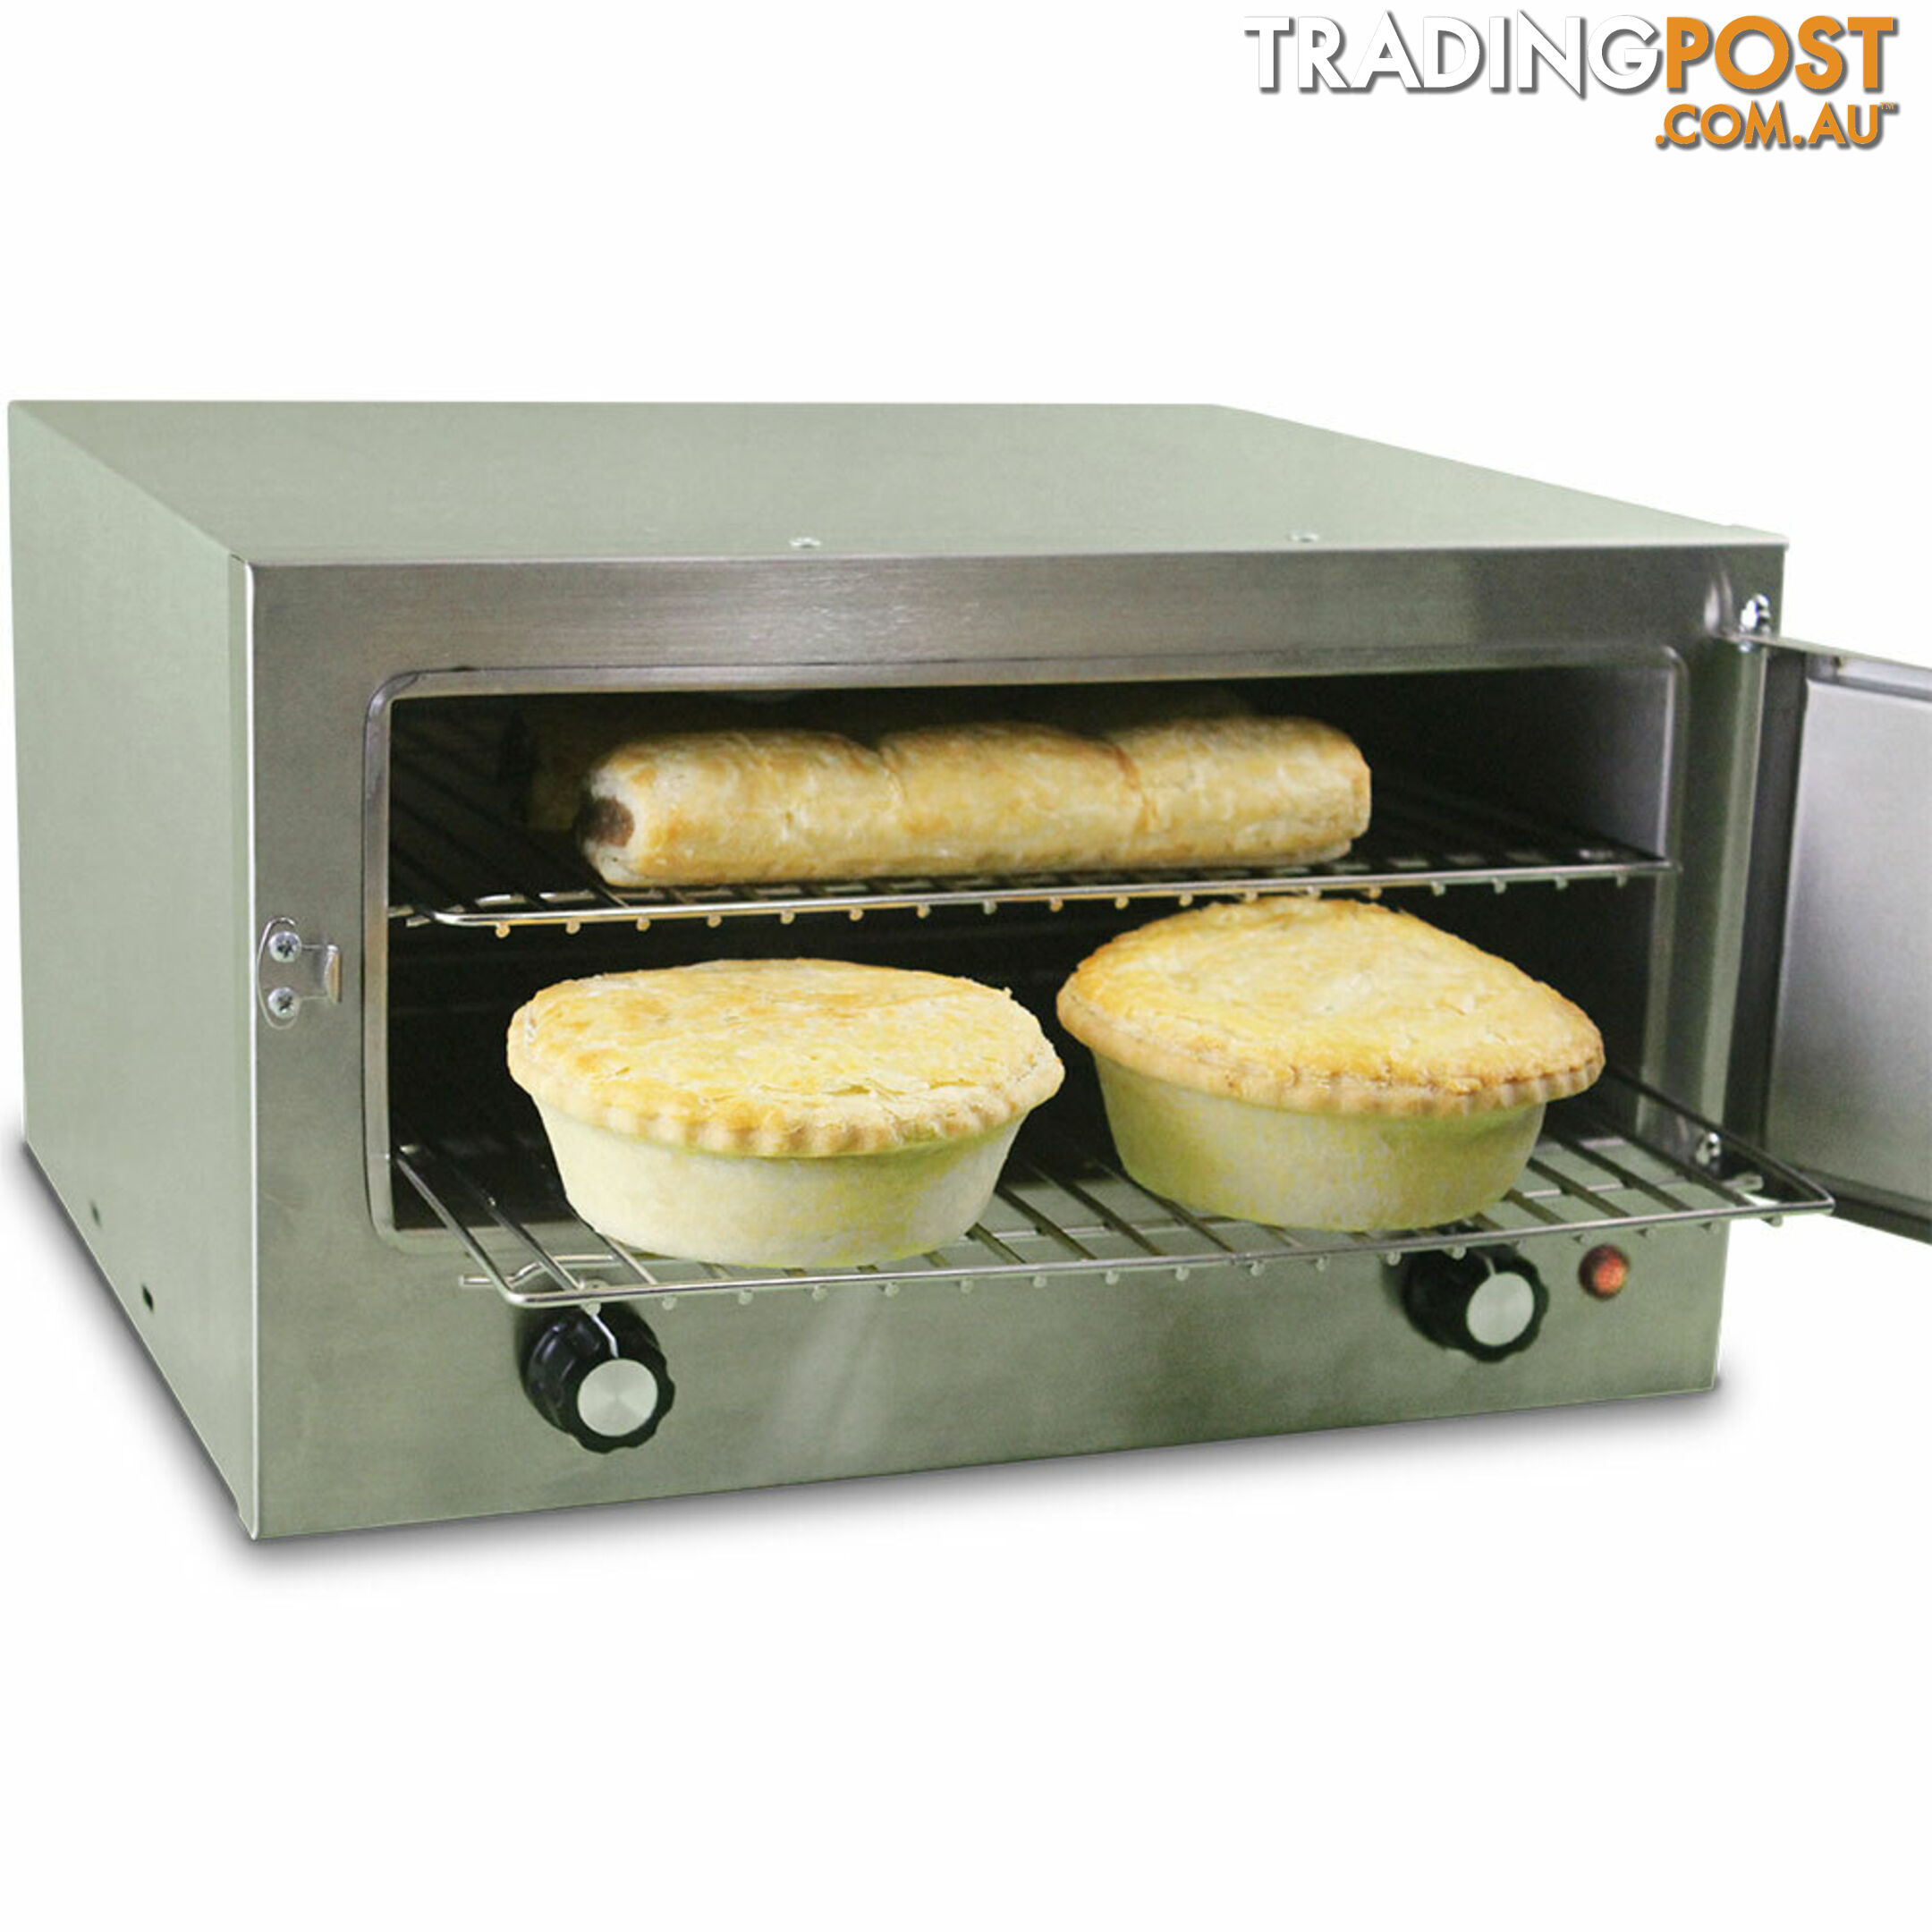 Road Chef 12v Oven - RPM - Camping Brands Other - 793052138141